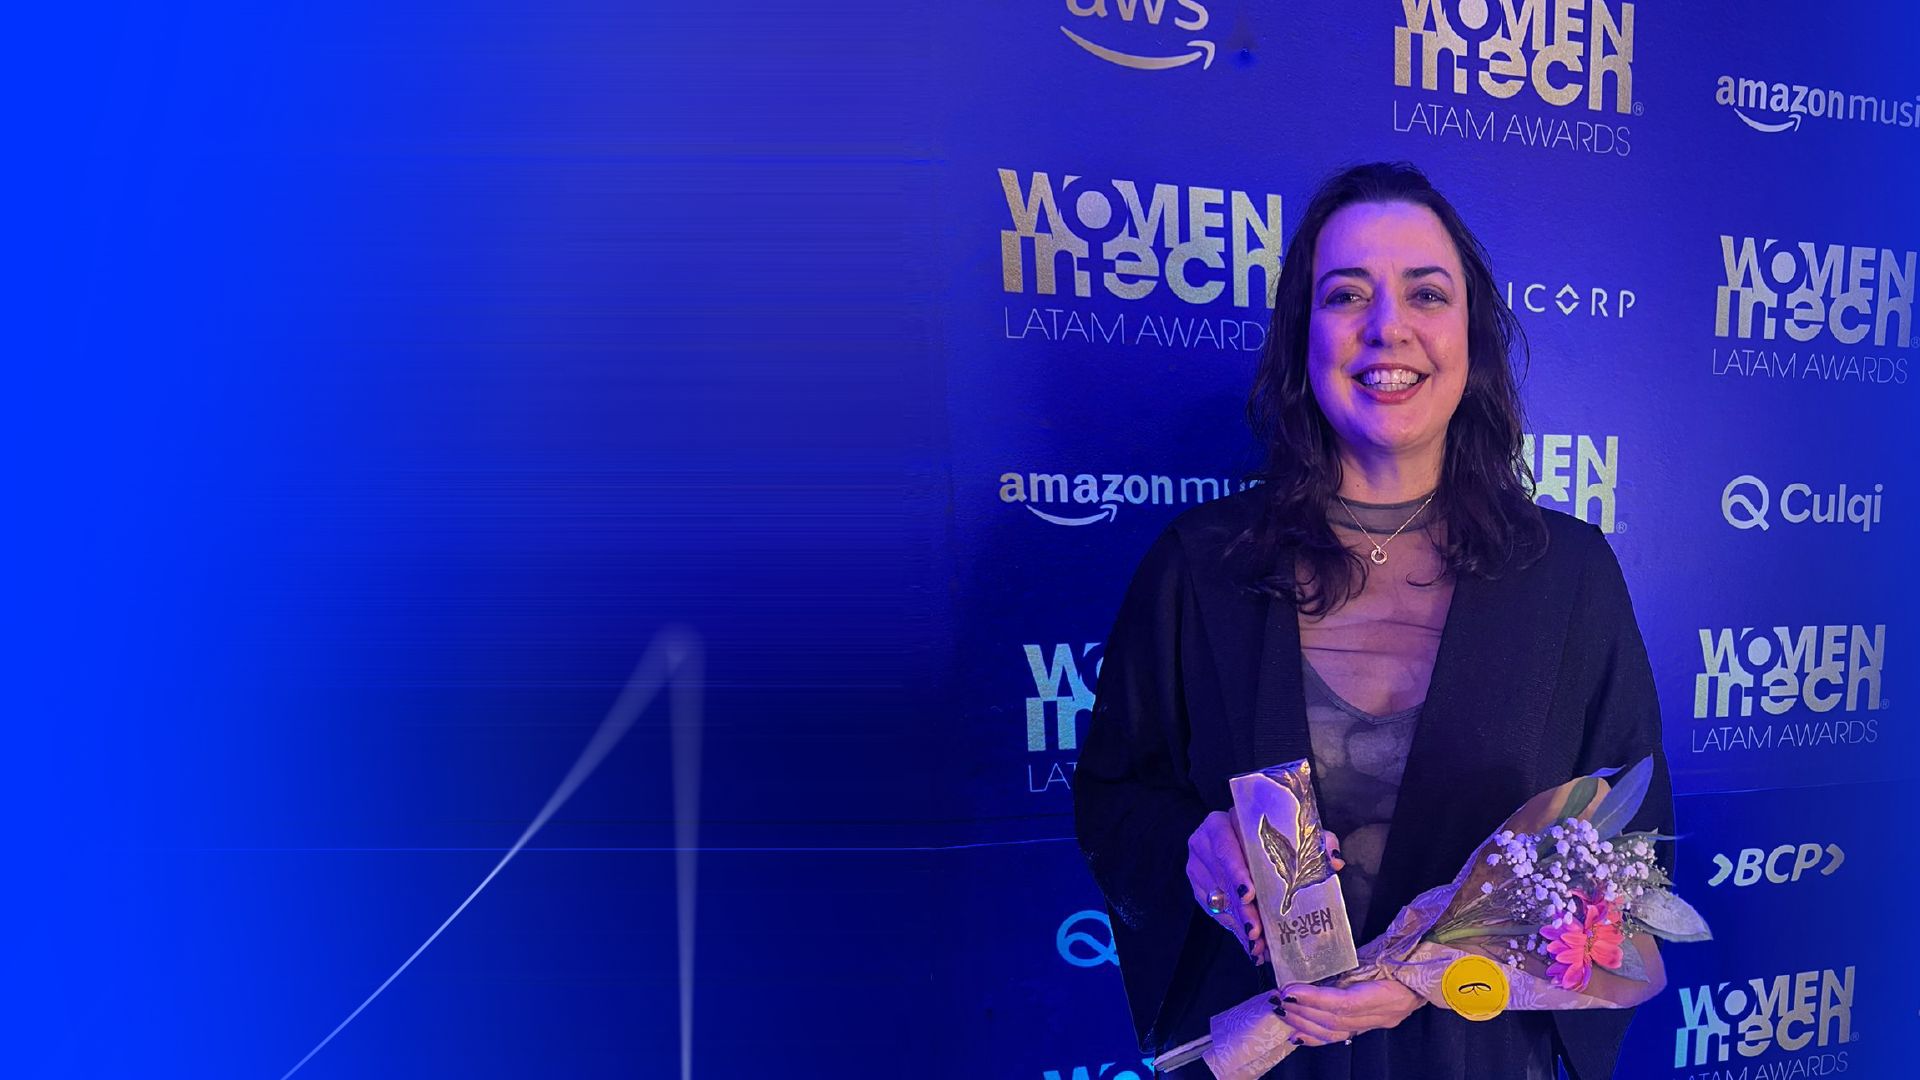 Women in Tech Awards: Simone Lettieri, Meta IT's CDO - Chief Digital Officer, awarded by Women in Tech Global Movement the top 1 recognition in Global Leadership